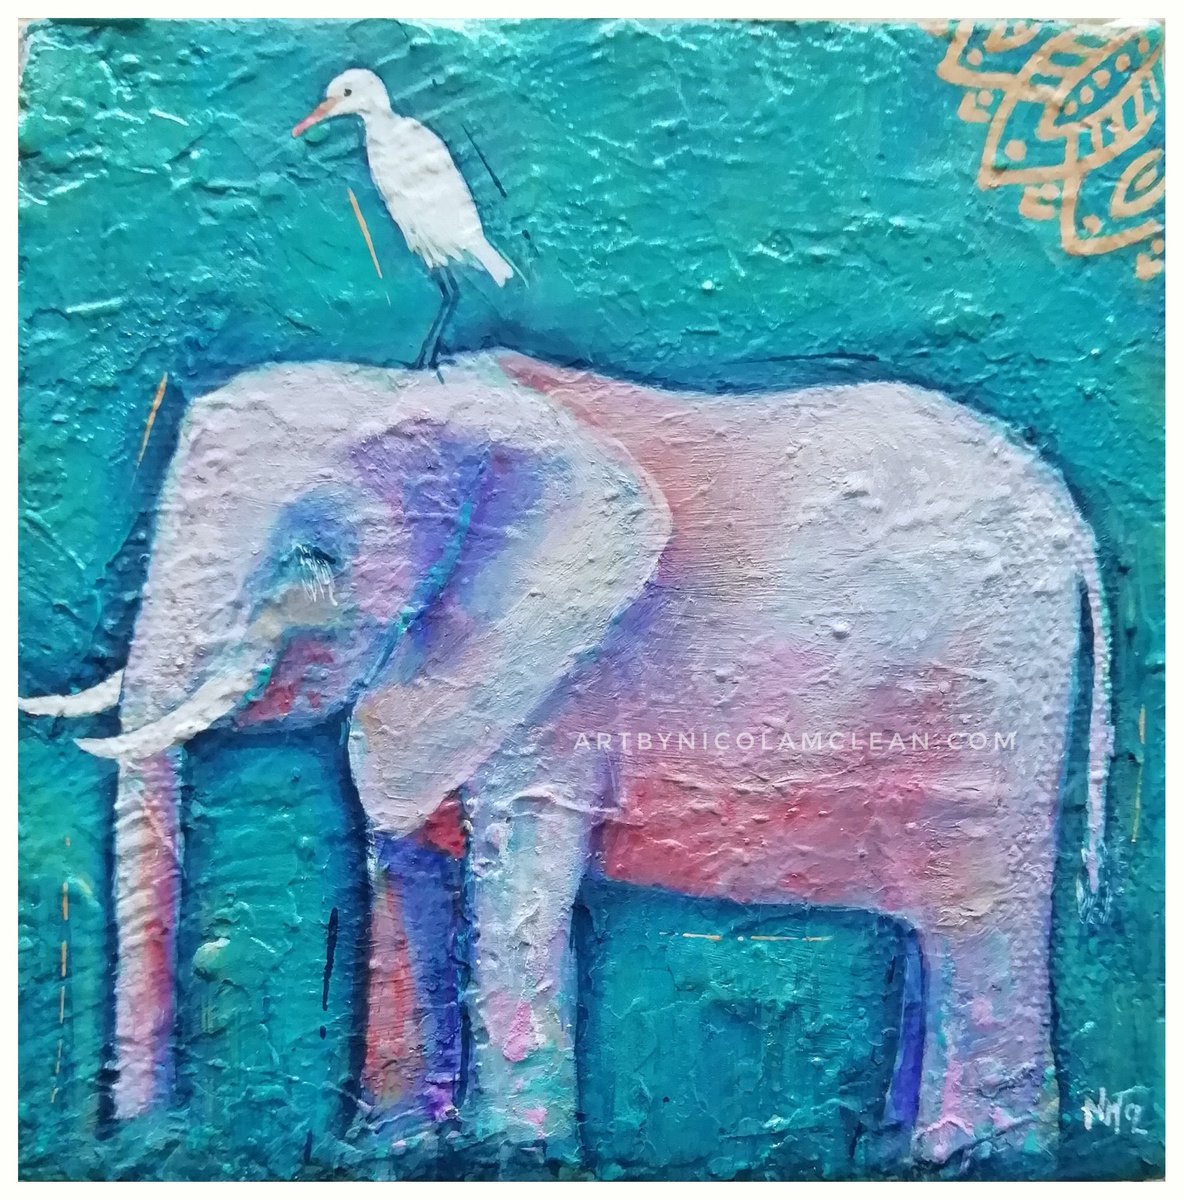 Symbiosis - The elephant and the egret by Nicola McLean